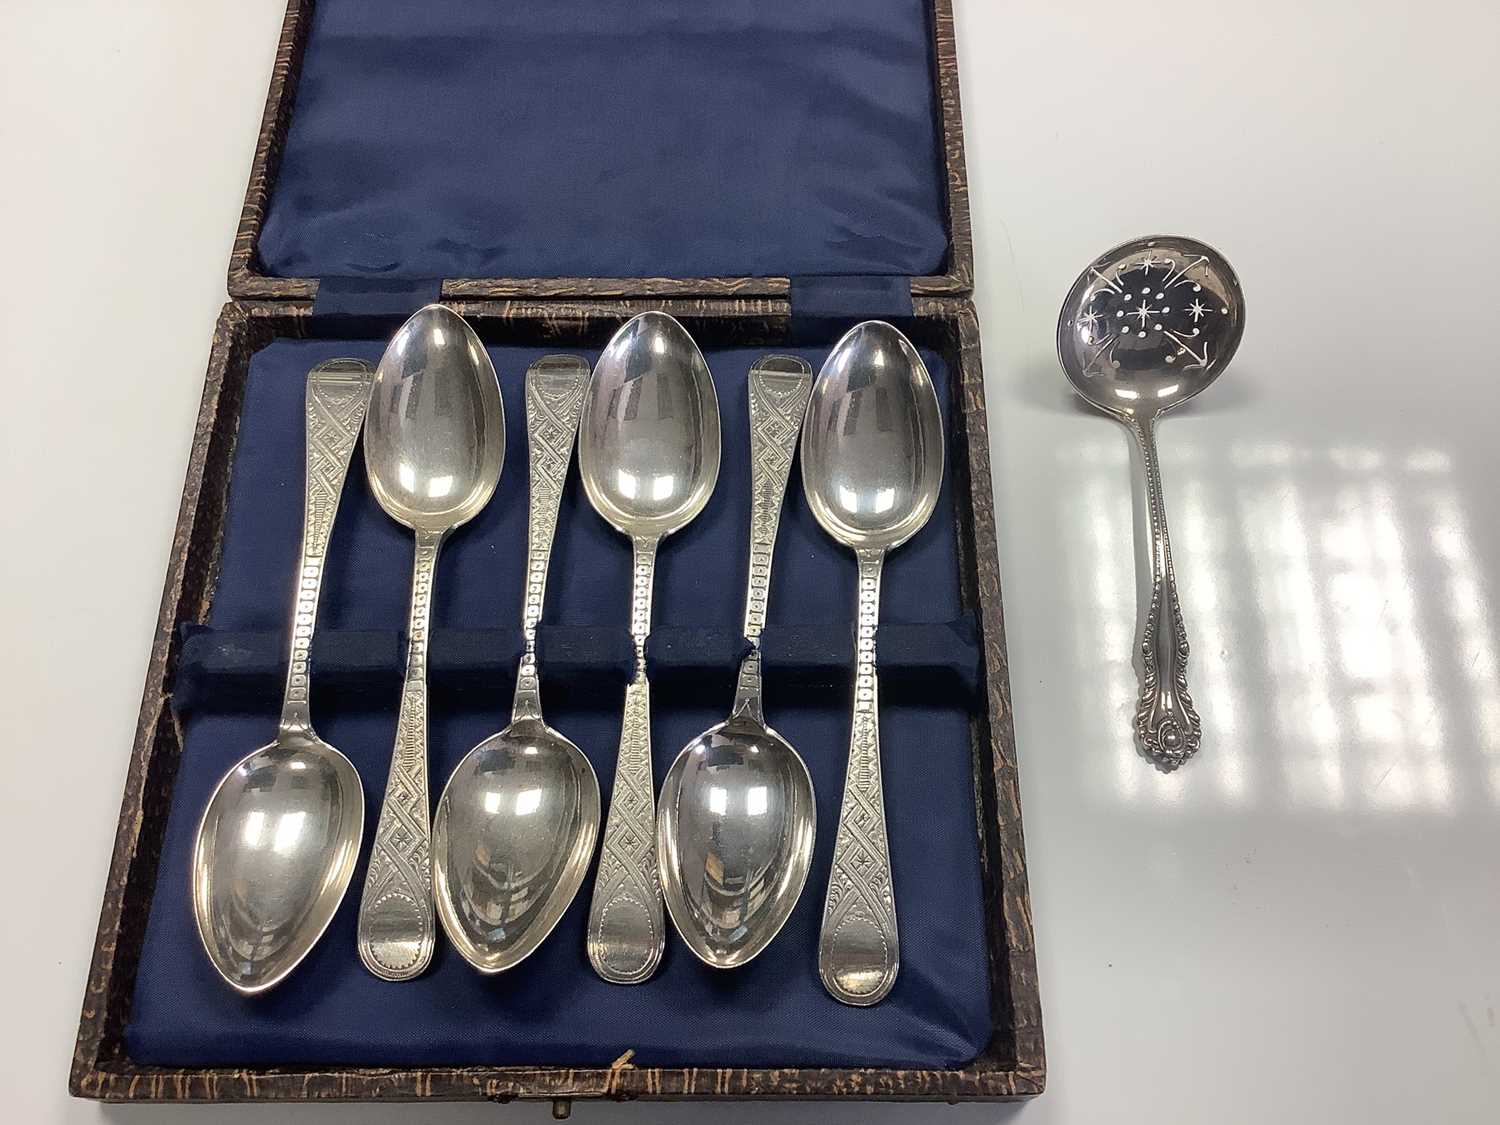 Lot 113 - Six Victorian Scottish silver Old English pattern teaspoons with engraved decoration (Glasgow 1879) in an associated fitted case, together a Victorian silver sifter spoon (London 1895), all at 4.5ozs